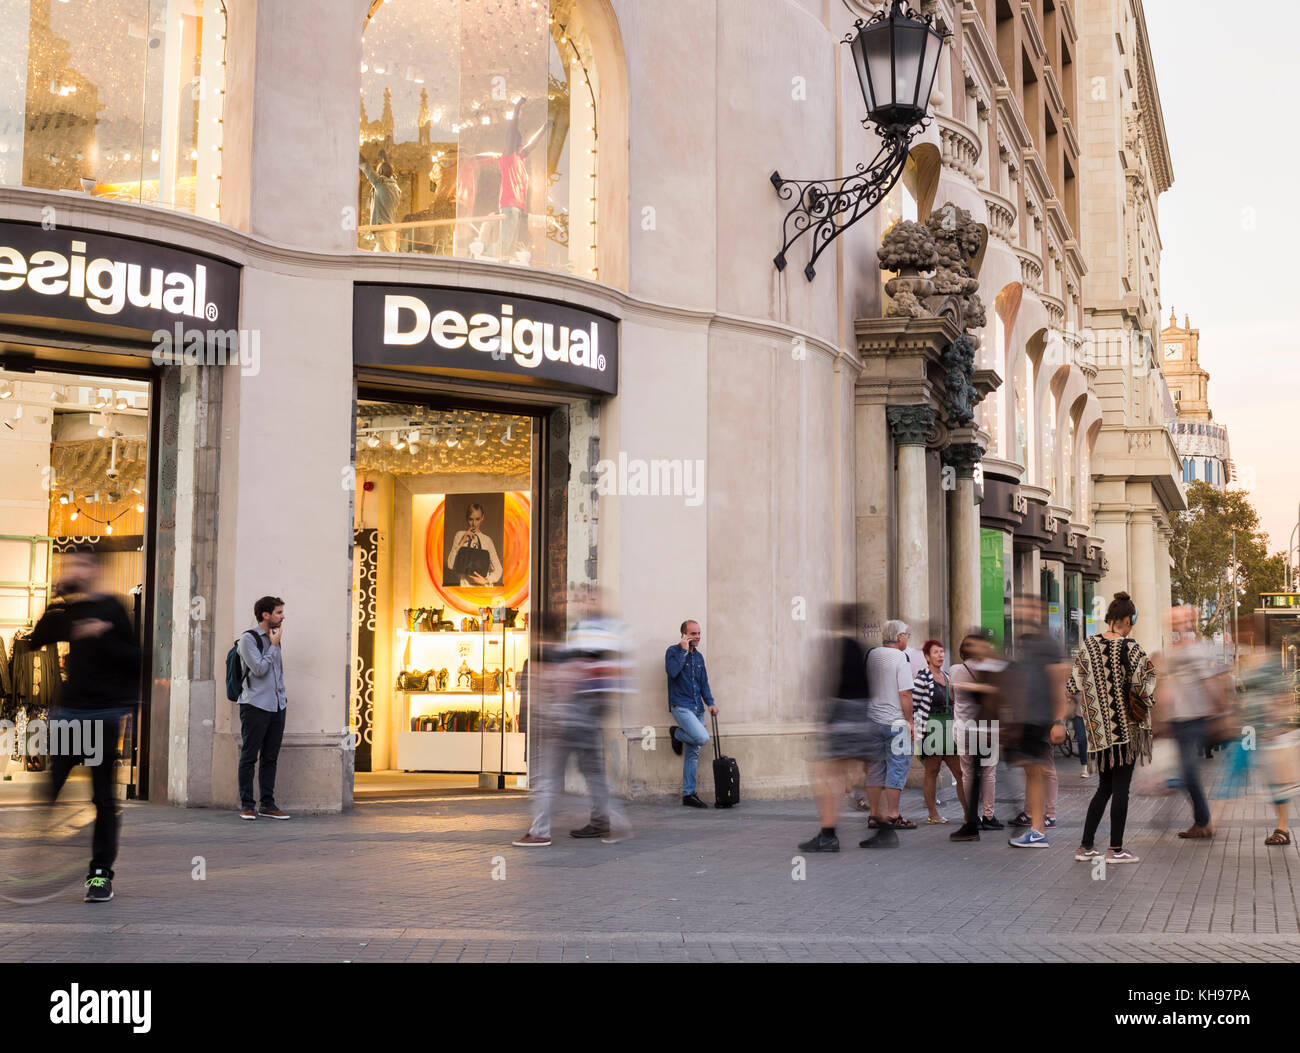 Desigual Store High Resolution Stock Photography and Images - Alamy